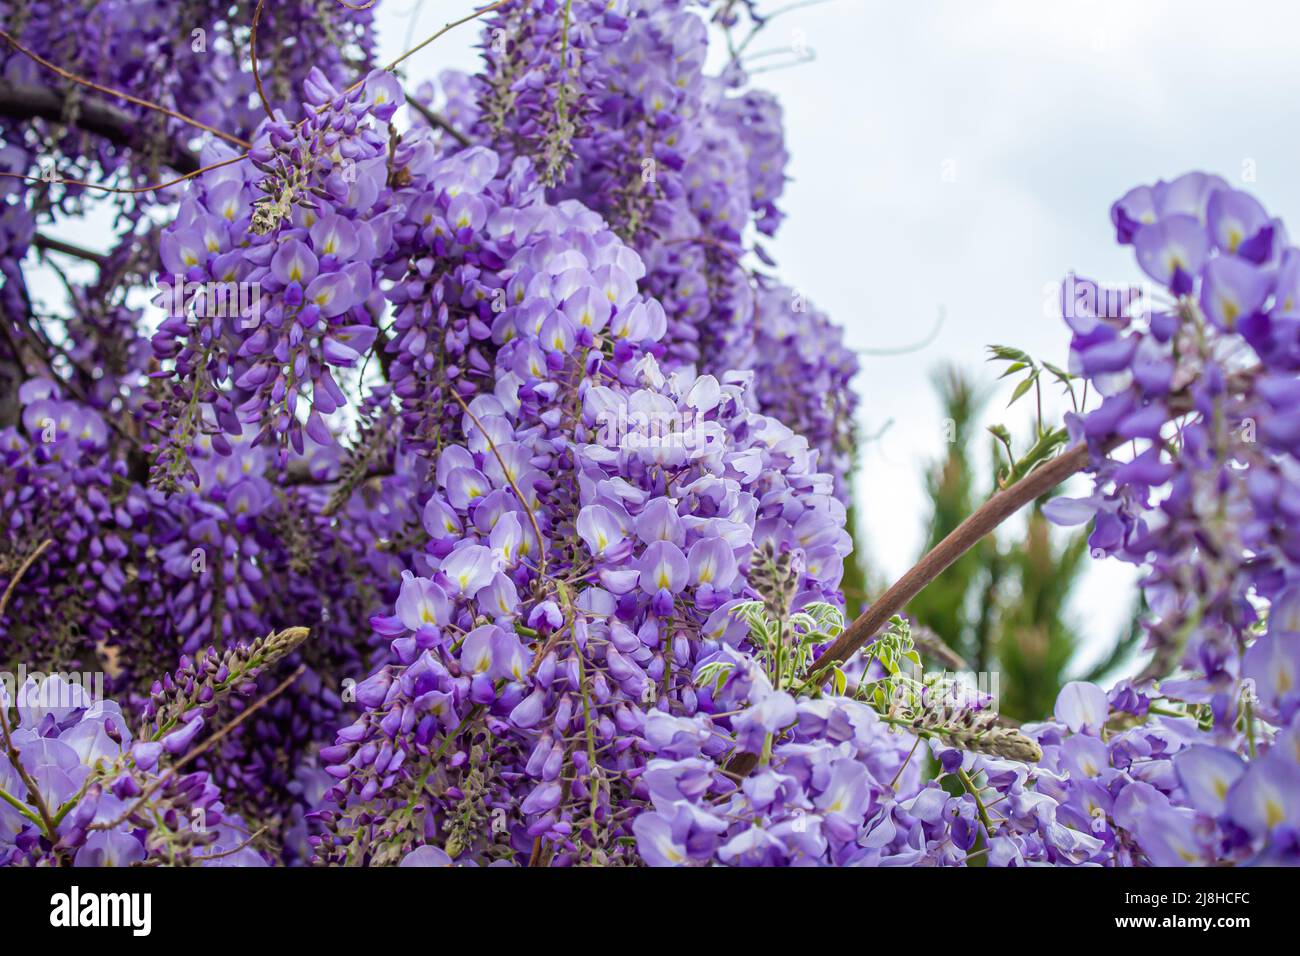 Wisteria sinensis. Closeup photo of Japanese Wisteria flowers. Blossom background. Purple flowers in the garden. Stock Photo